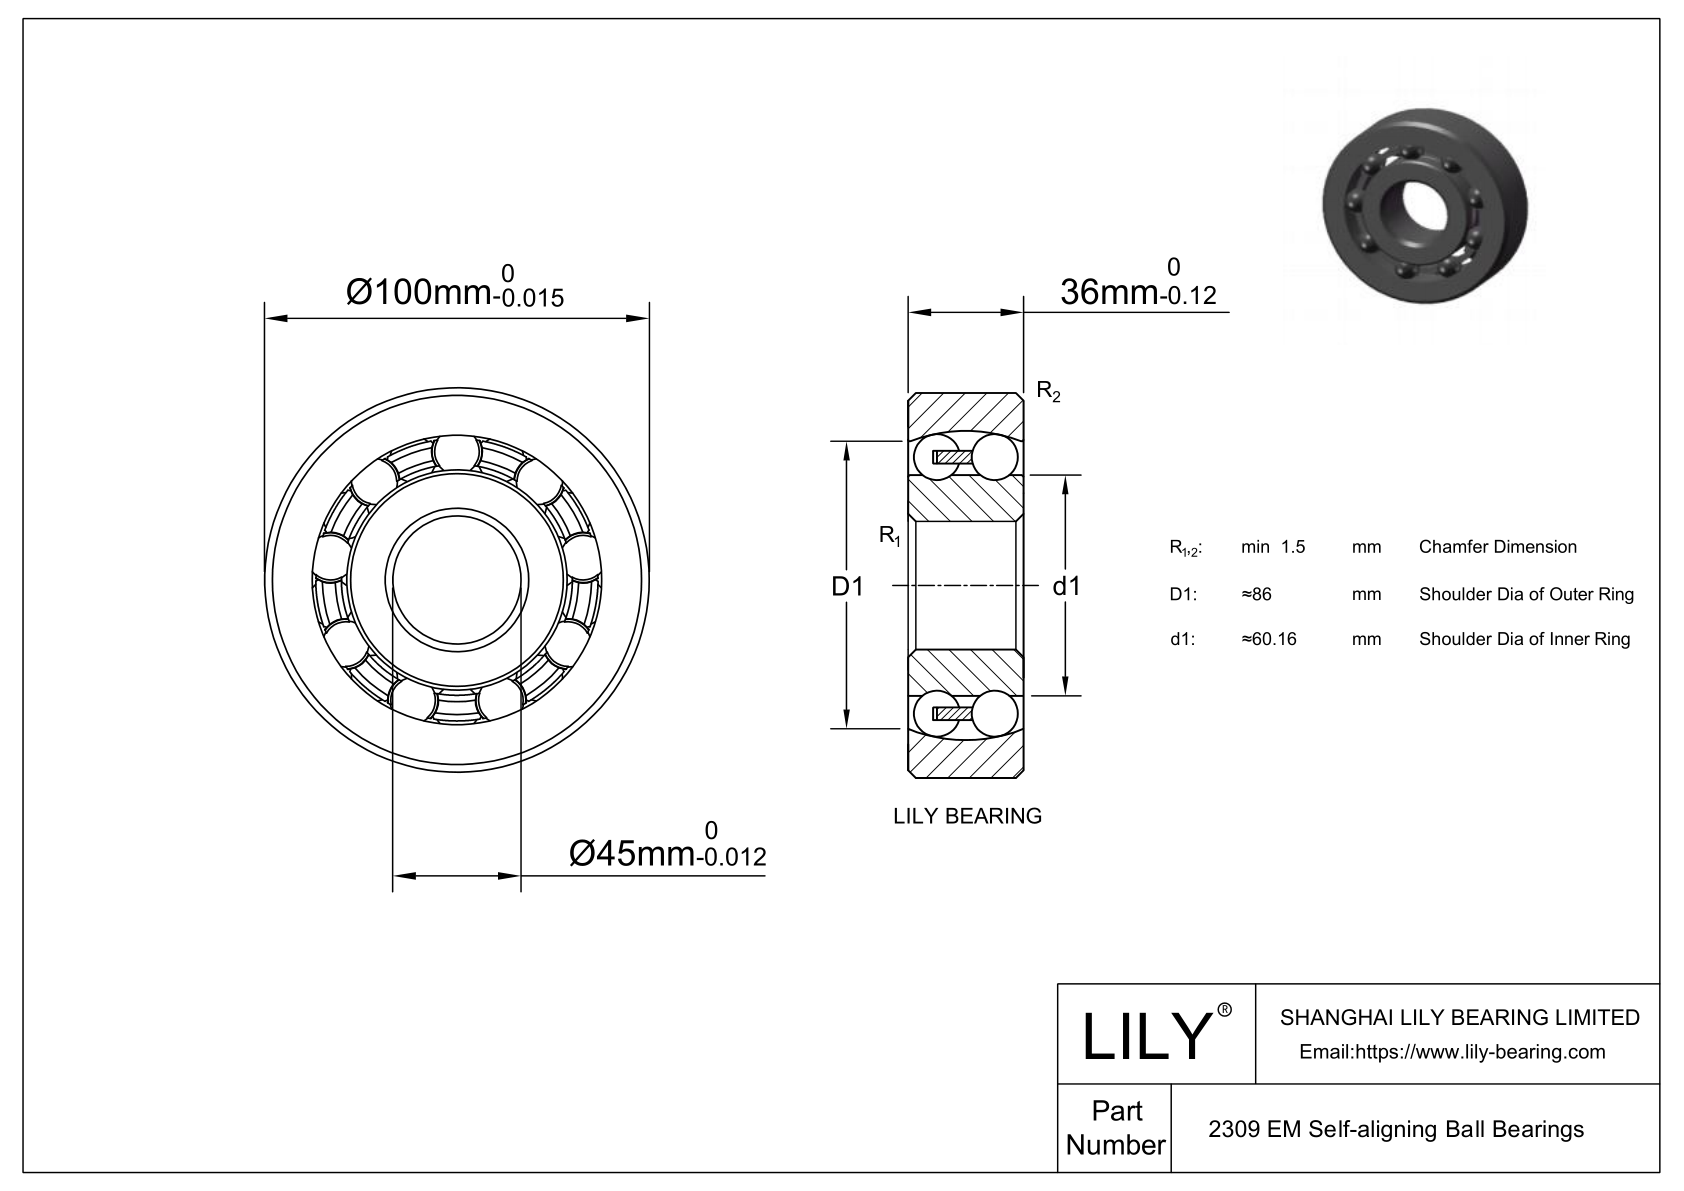 S2309 EM Stainless Steel Self Aligning Ball Bearings cad drawing